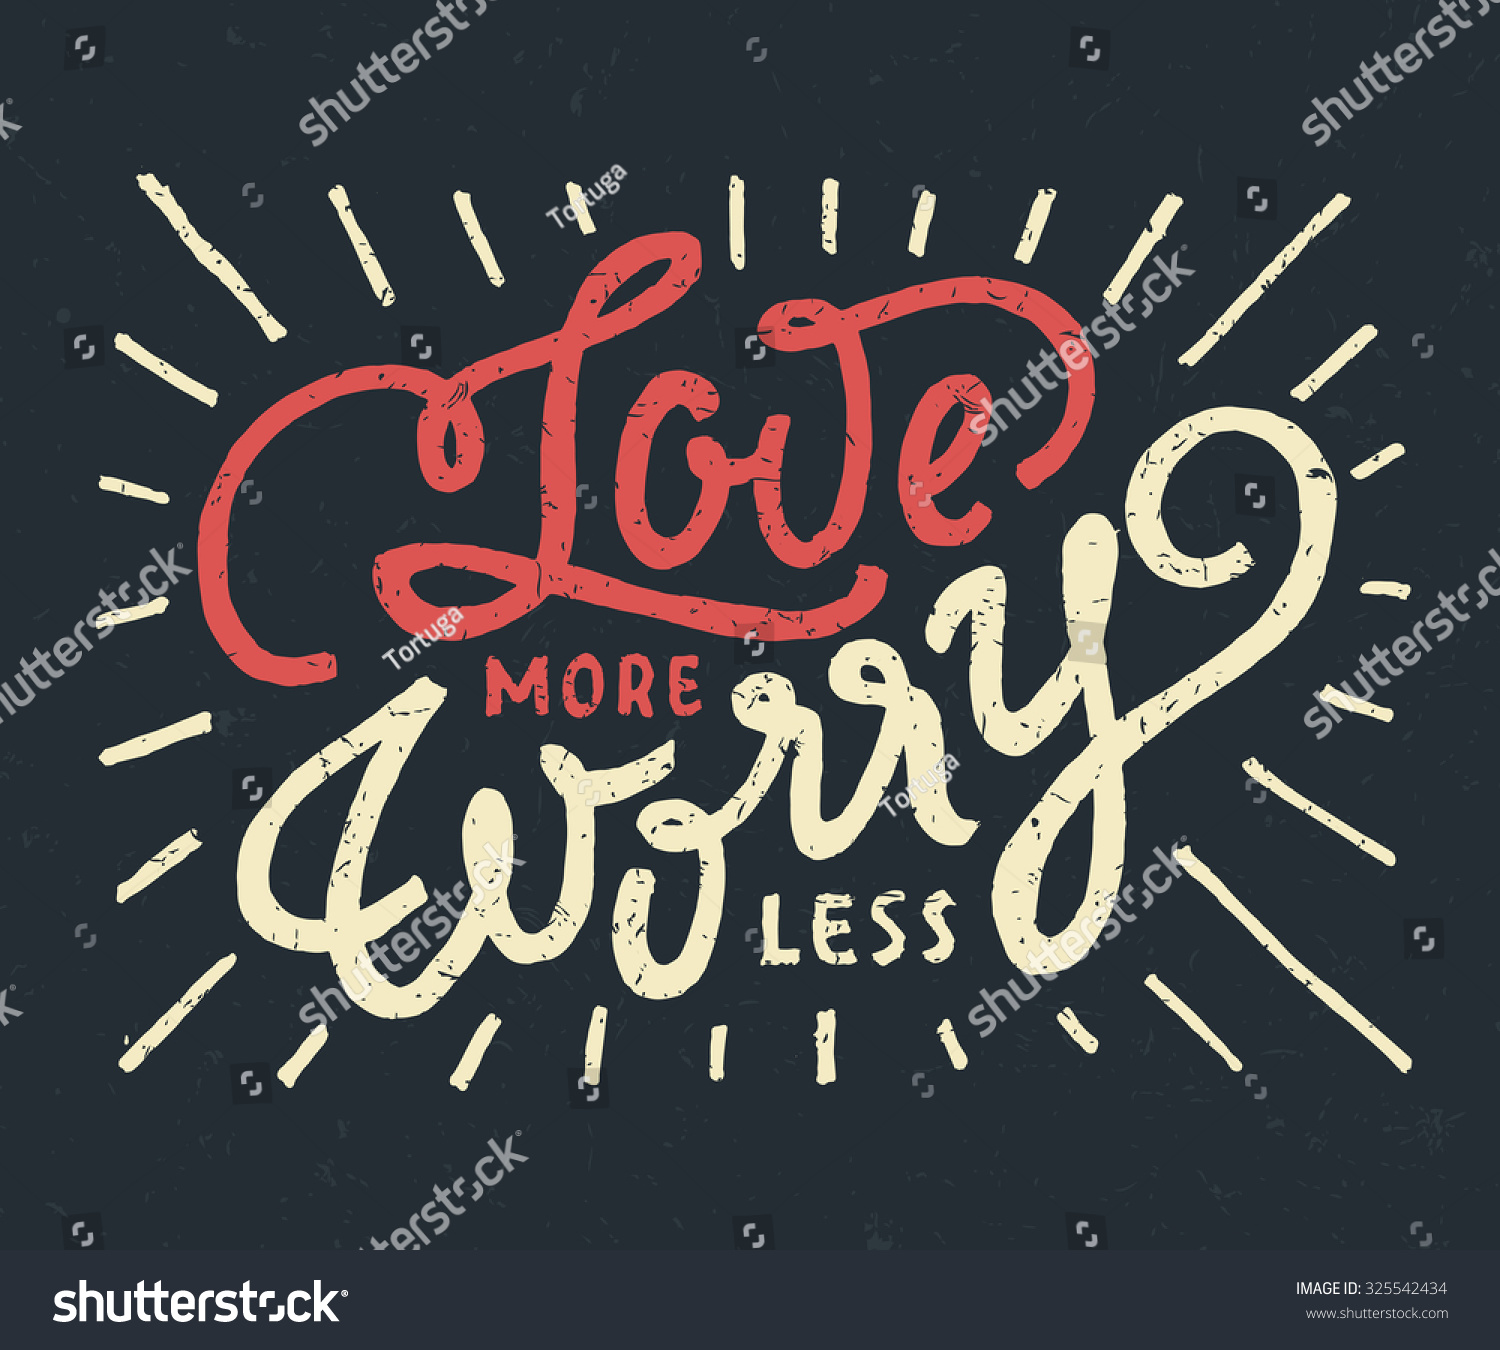 SVG of 'Love more Worry Less' motivational vintage hand lettered textured quote for t shirt apparel tee fashion graphics, wall art prints, home interior decor, poster, card design, retro vector illustration. svg